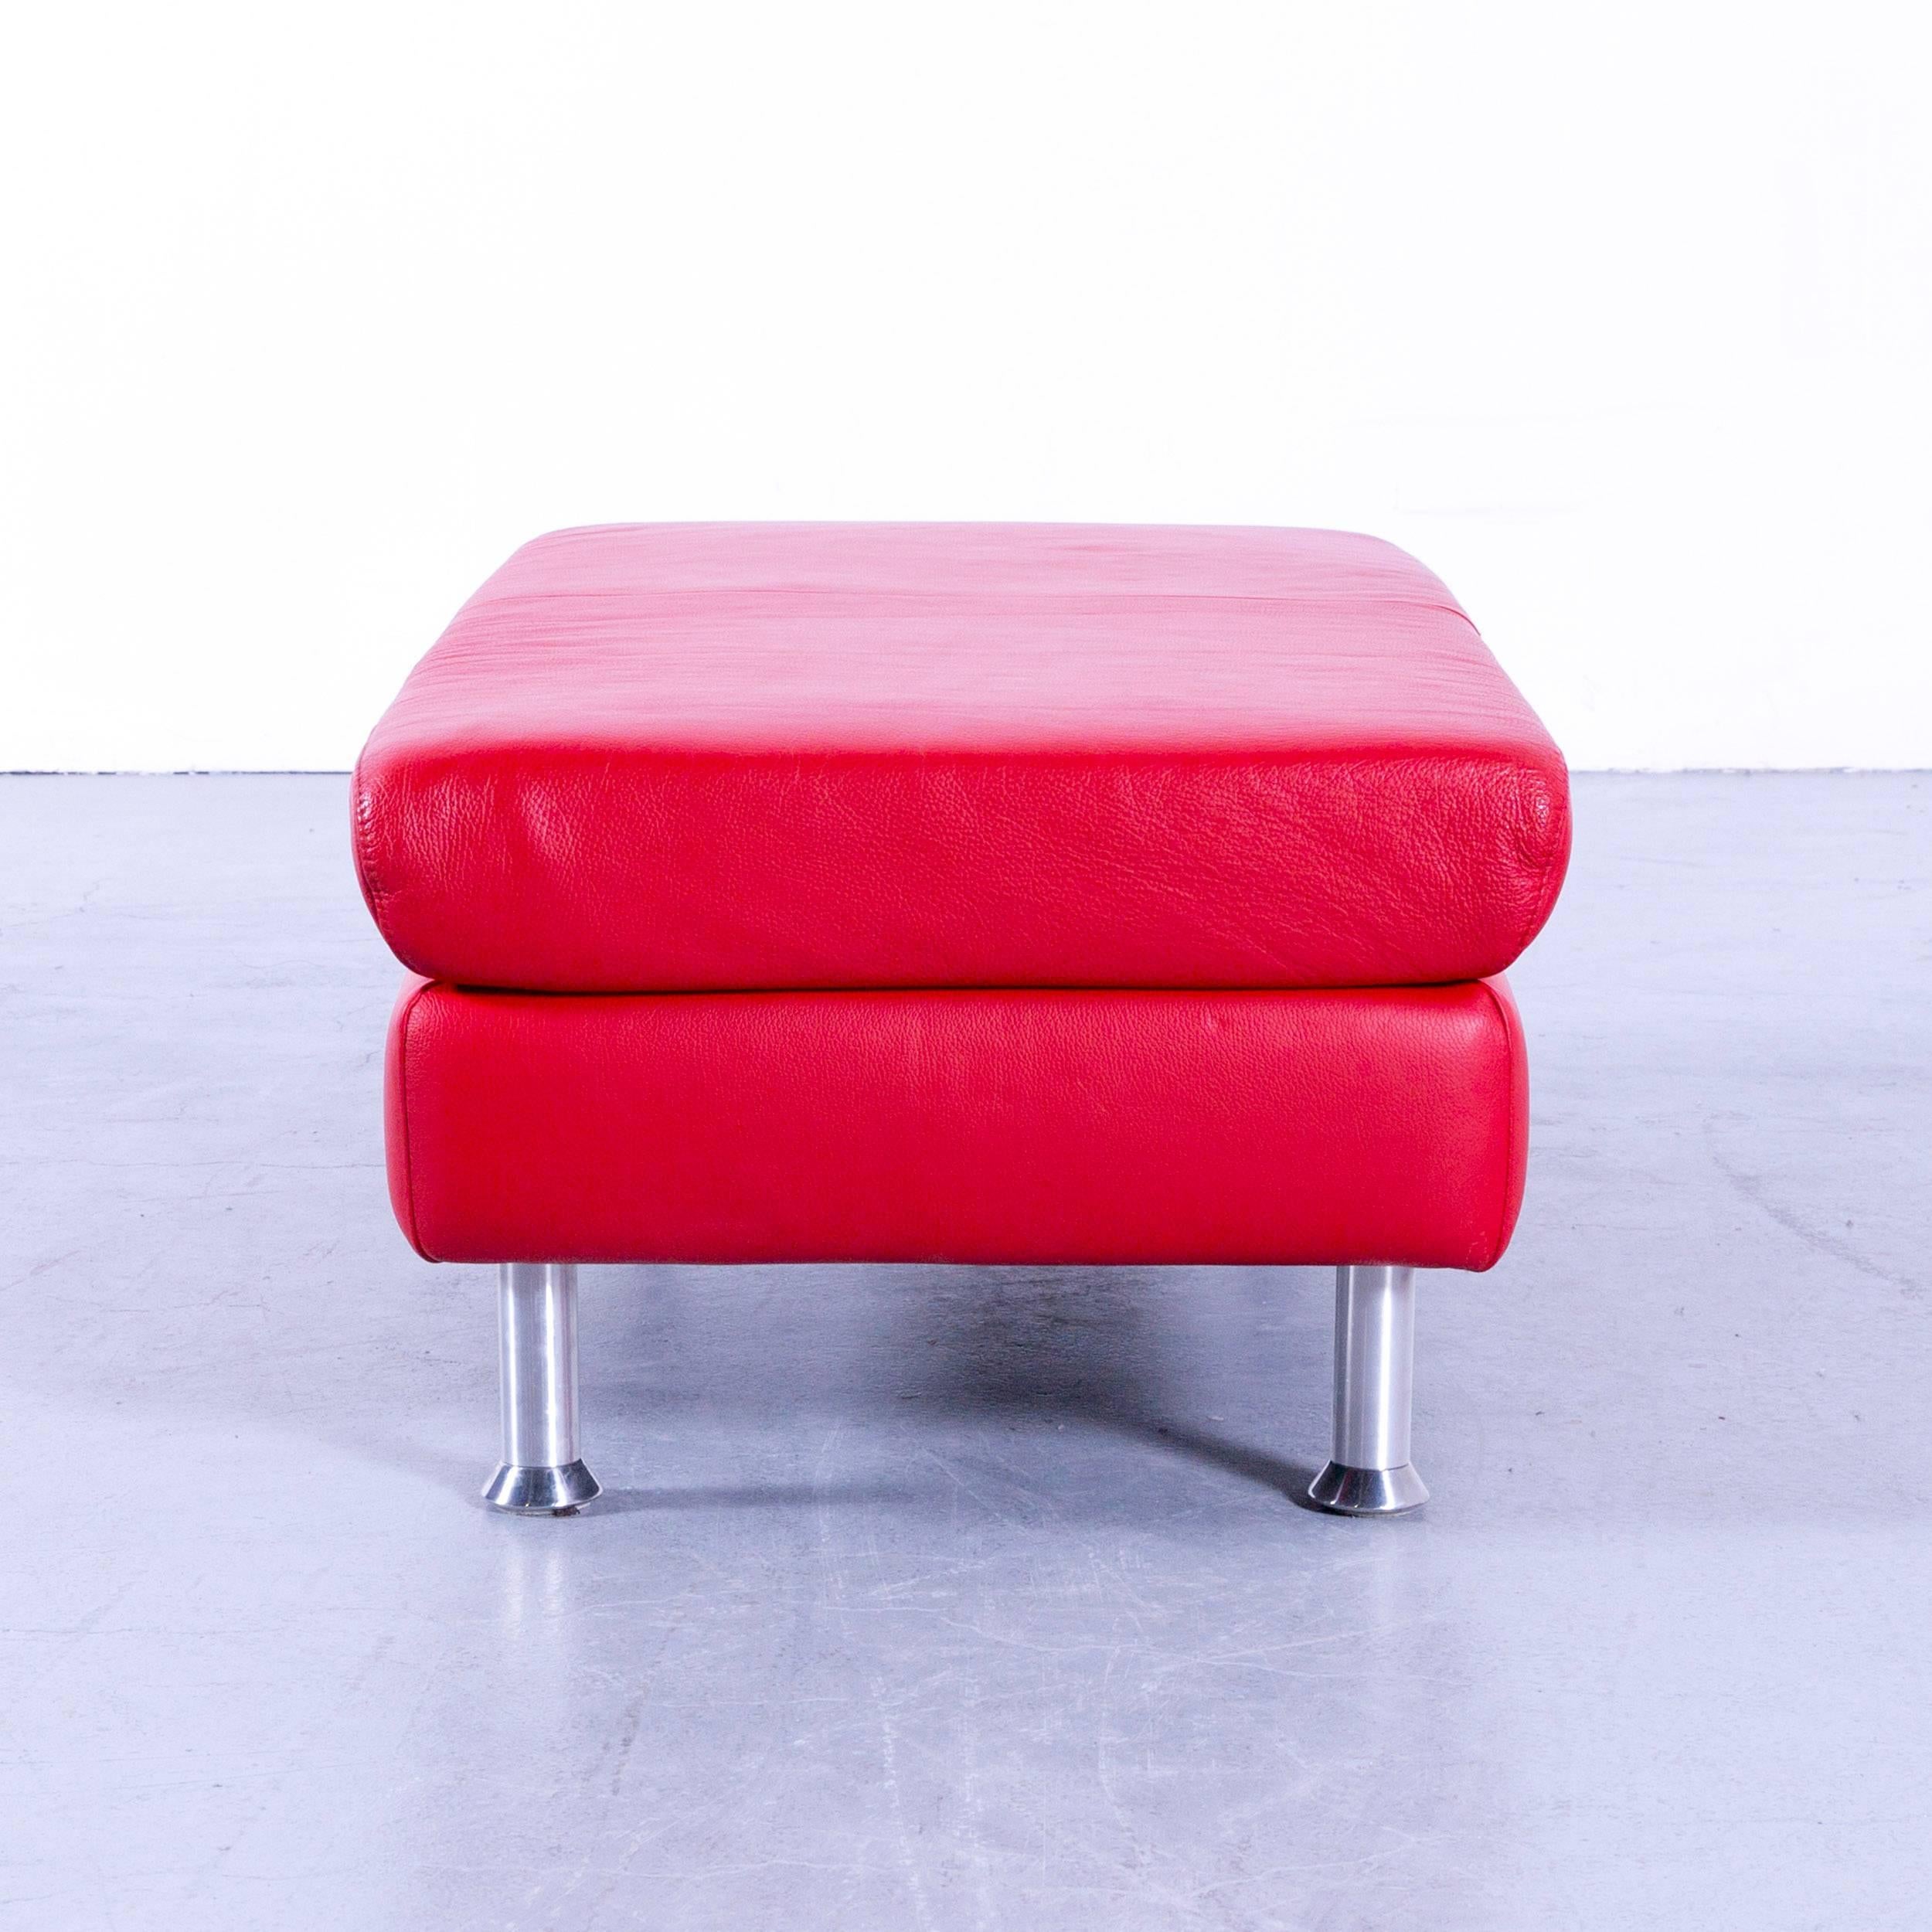 couch stool